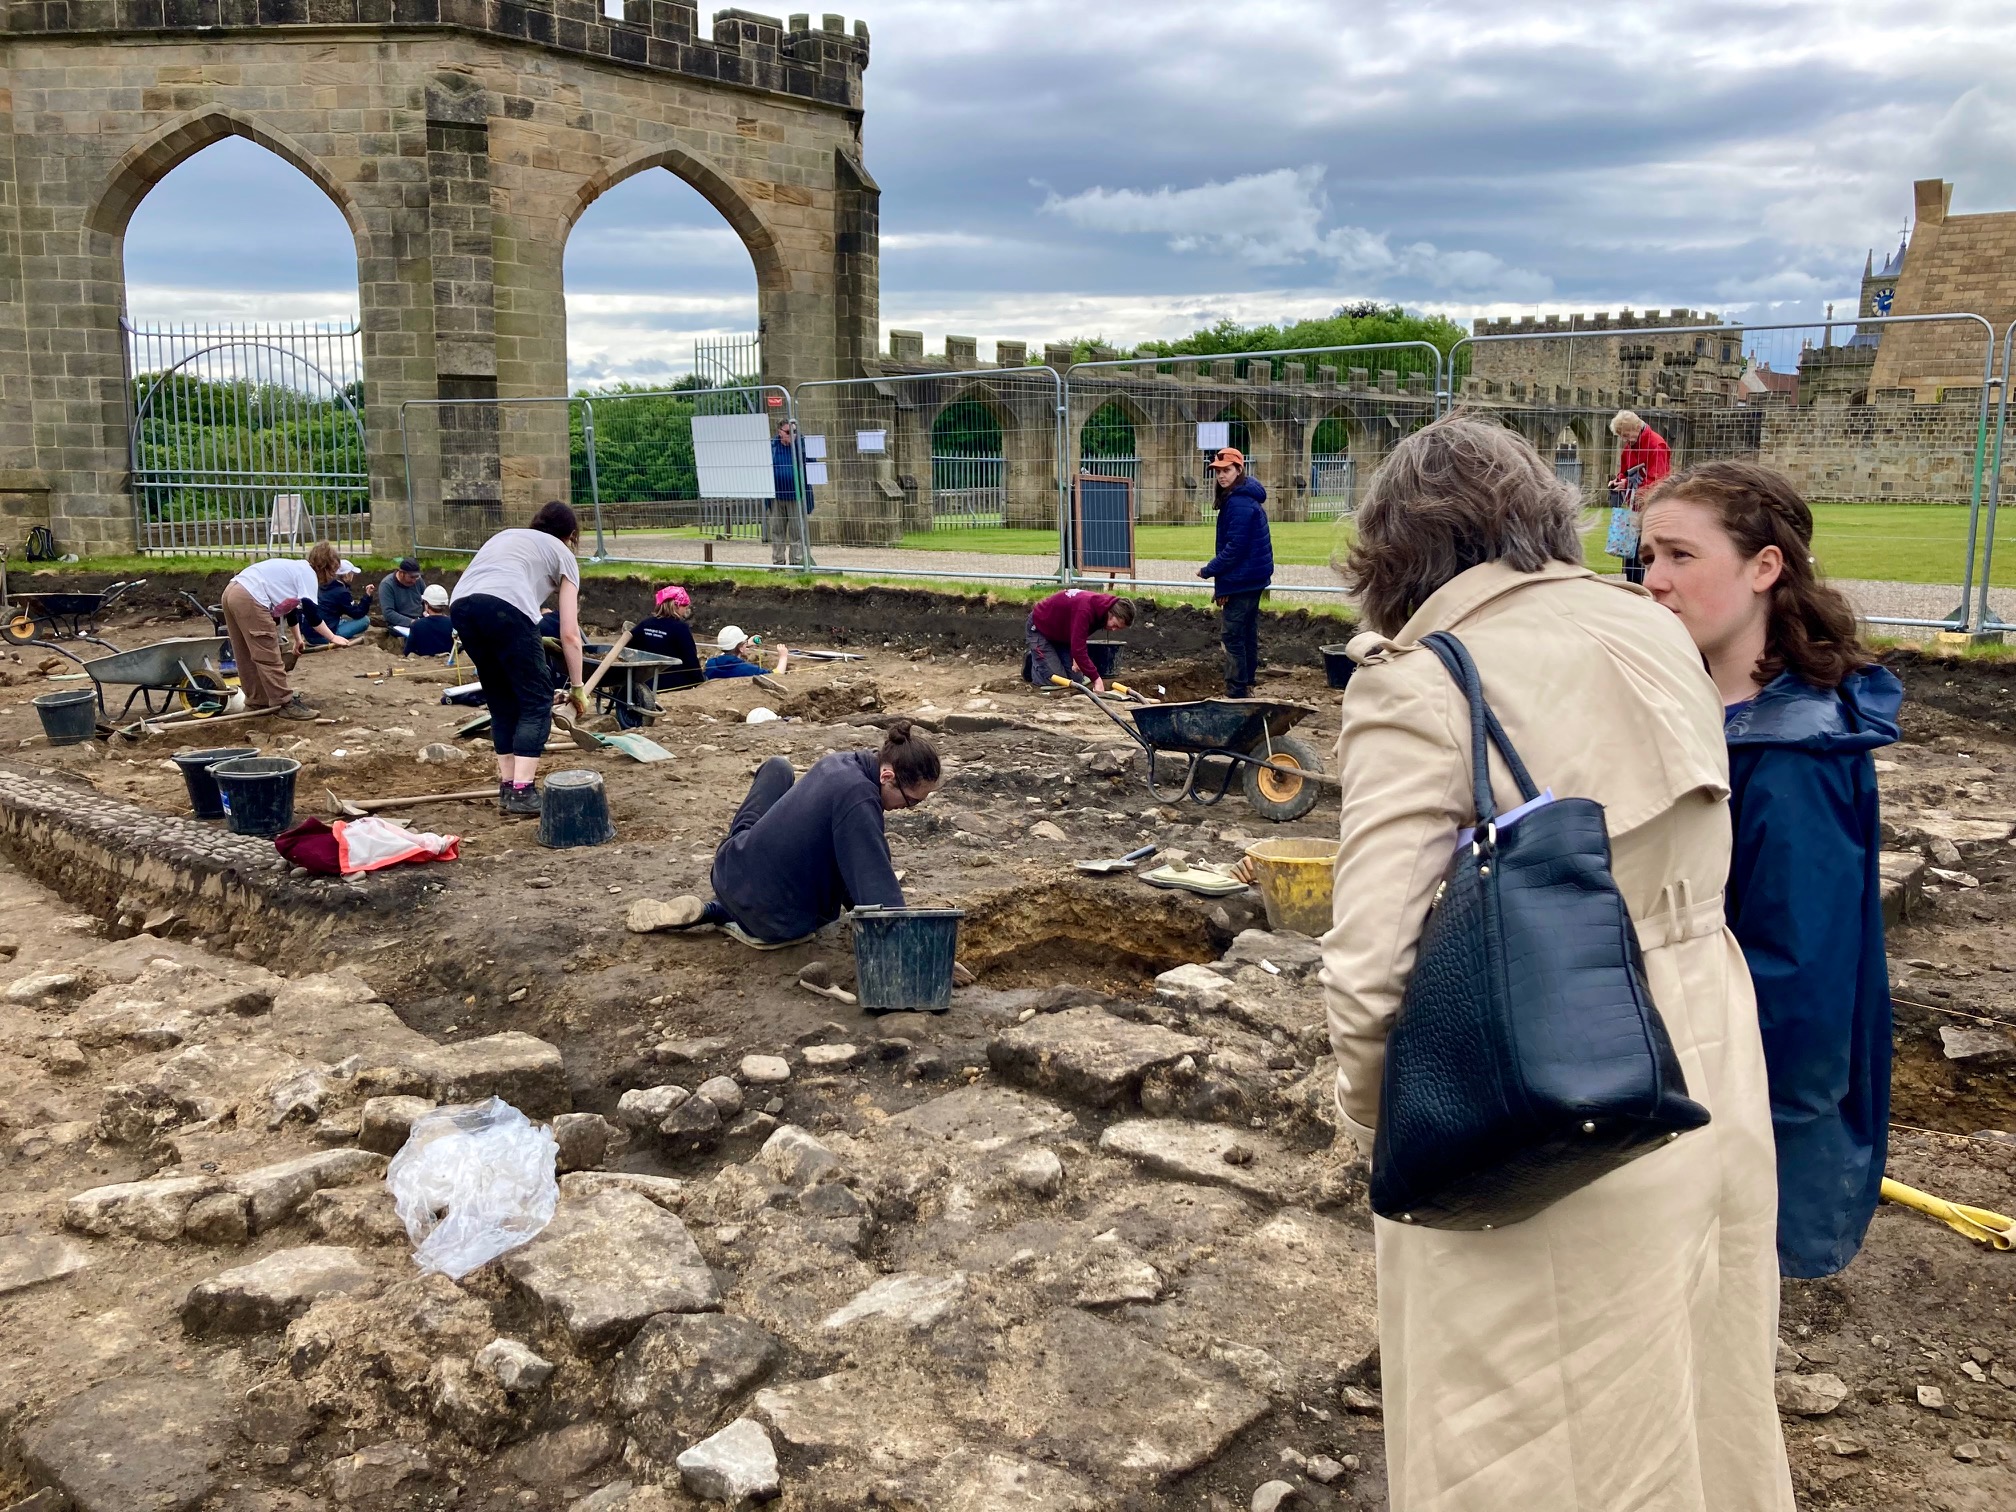 Two people are talking inside an archaeological trench, where remains of stone floors are gradually being uncovered. In the background are some Archaeology students with mattocks, buckets and shovels. In the far distance are arched medieval stone walls under a bluish grey cloudy sky.